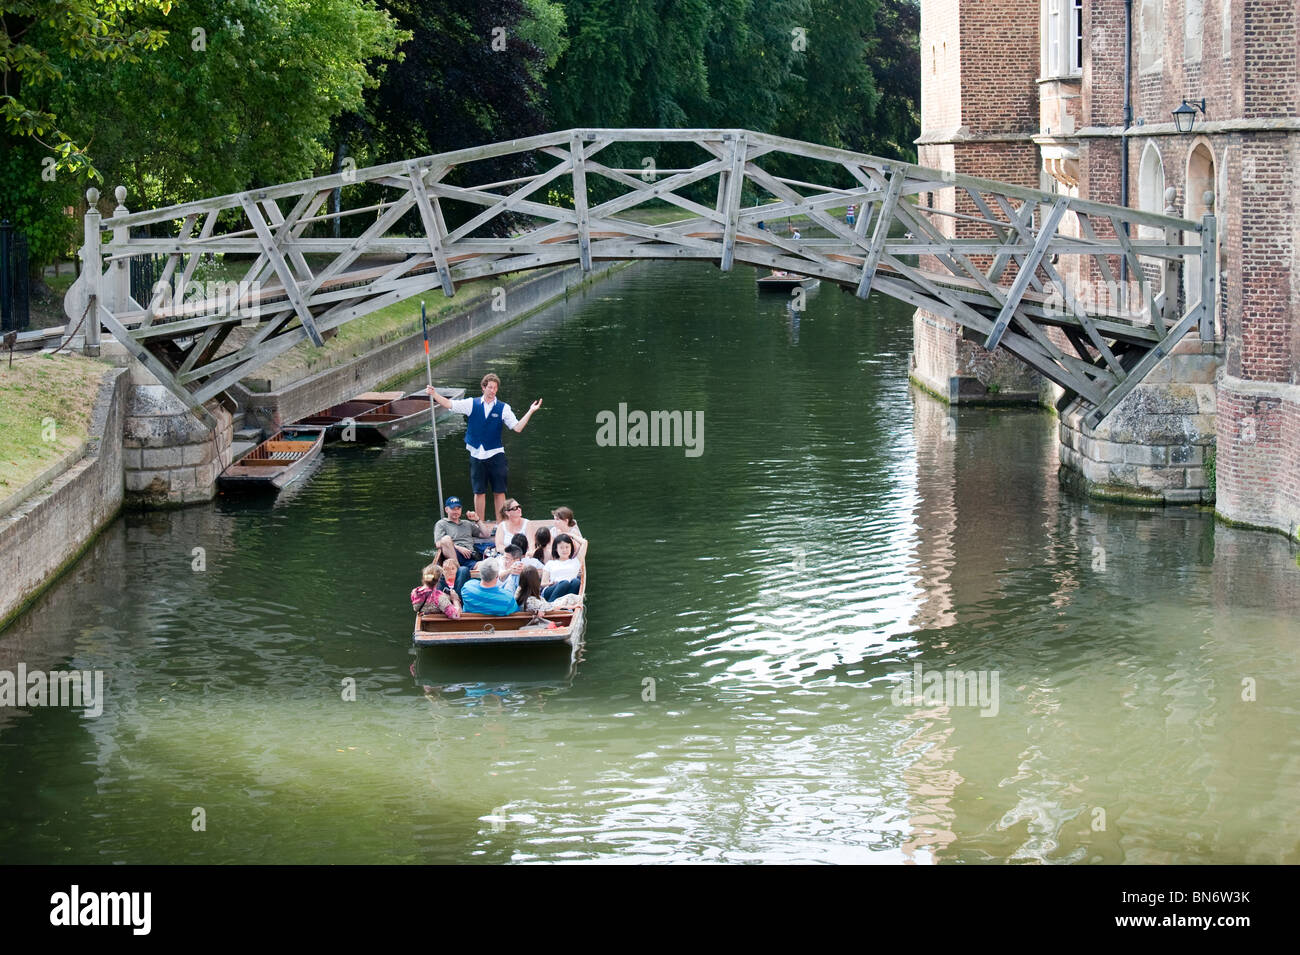 Guided punt tour on the River Cam near the mathematical bridge. Two tourists in punt on sunny summer day. Stock Photo